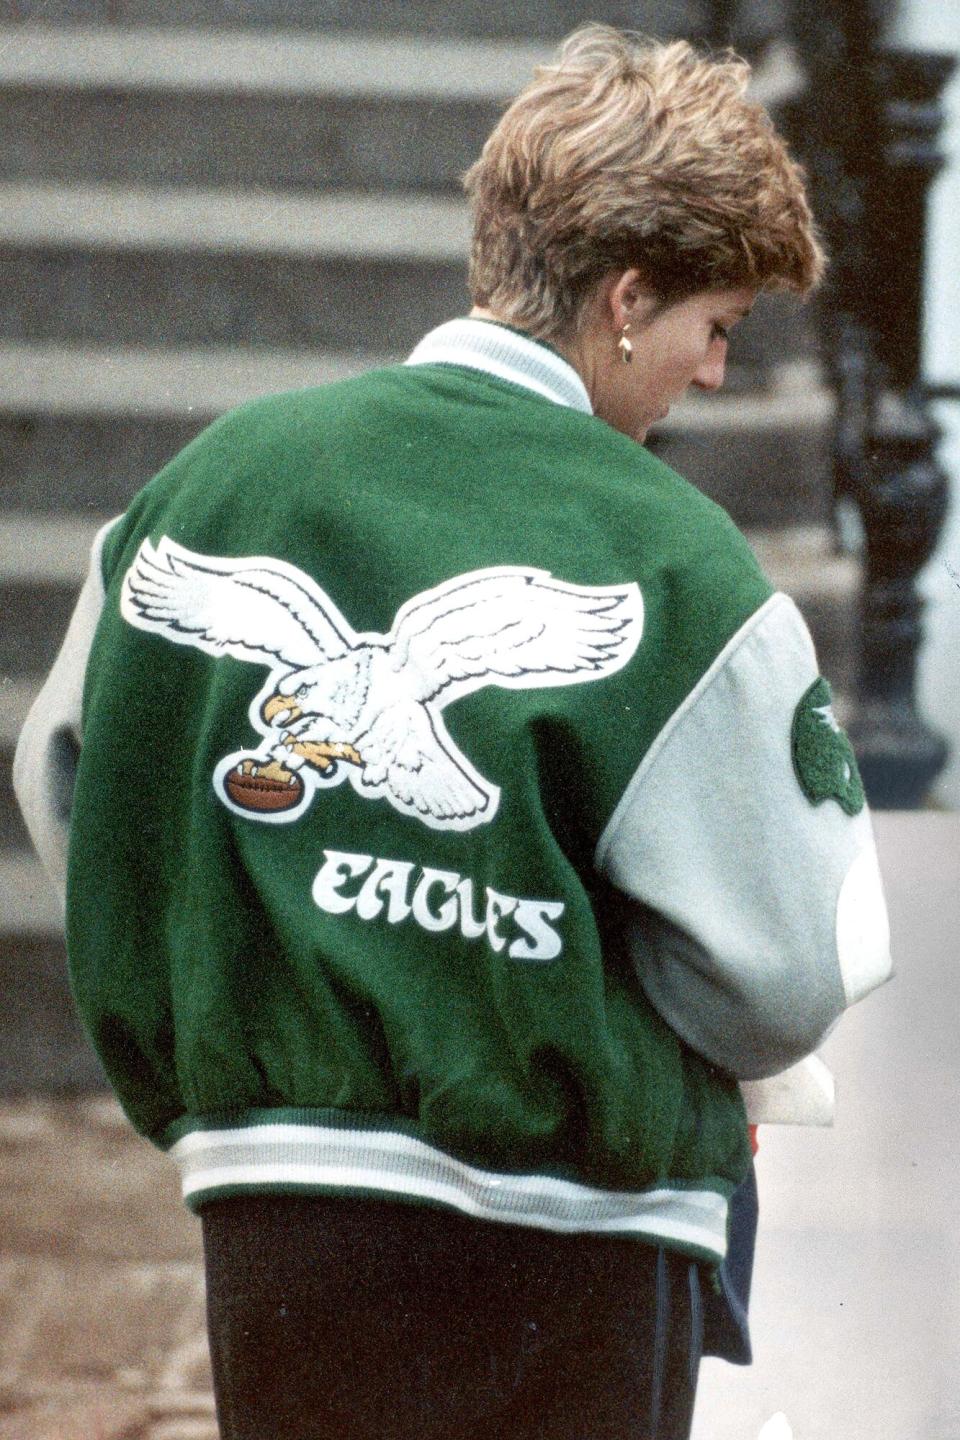 Princess Diana Pictured Wearing A Philadelphia Eagles Jacket. Diana Princess Of Wales Pictured Wearing A Philadelphia Eagles Jacket.